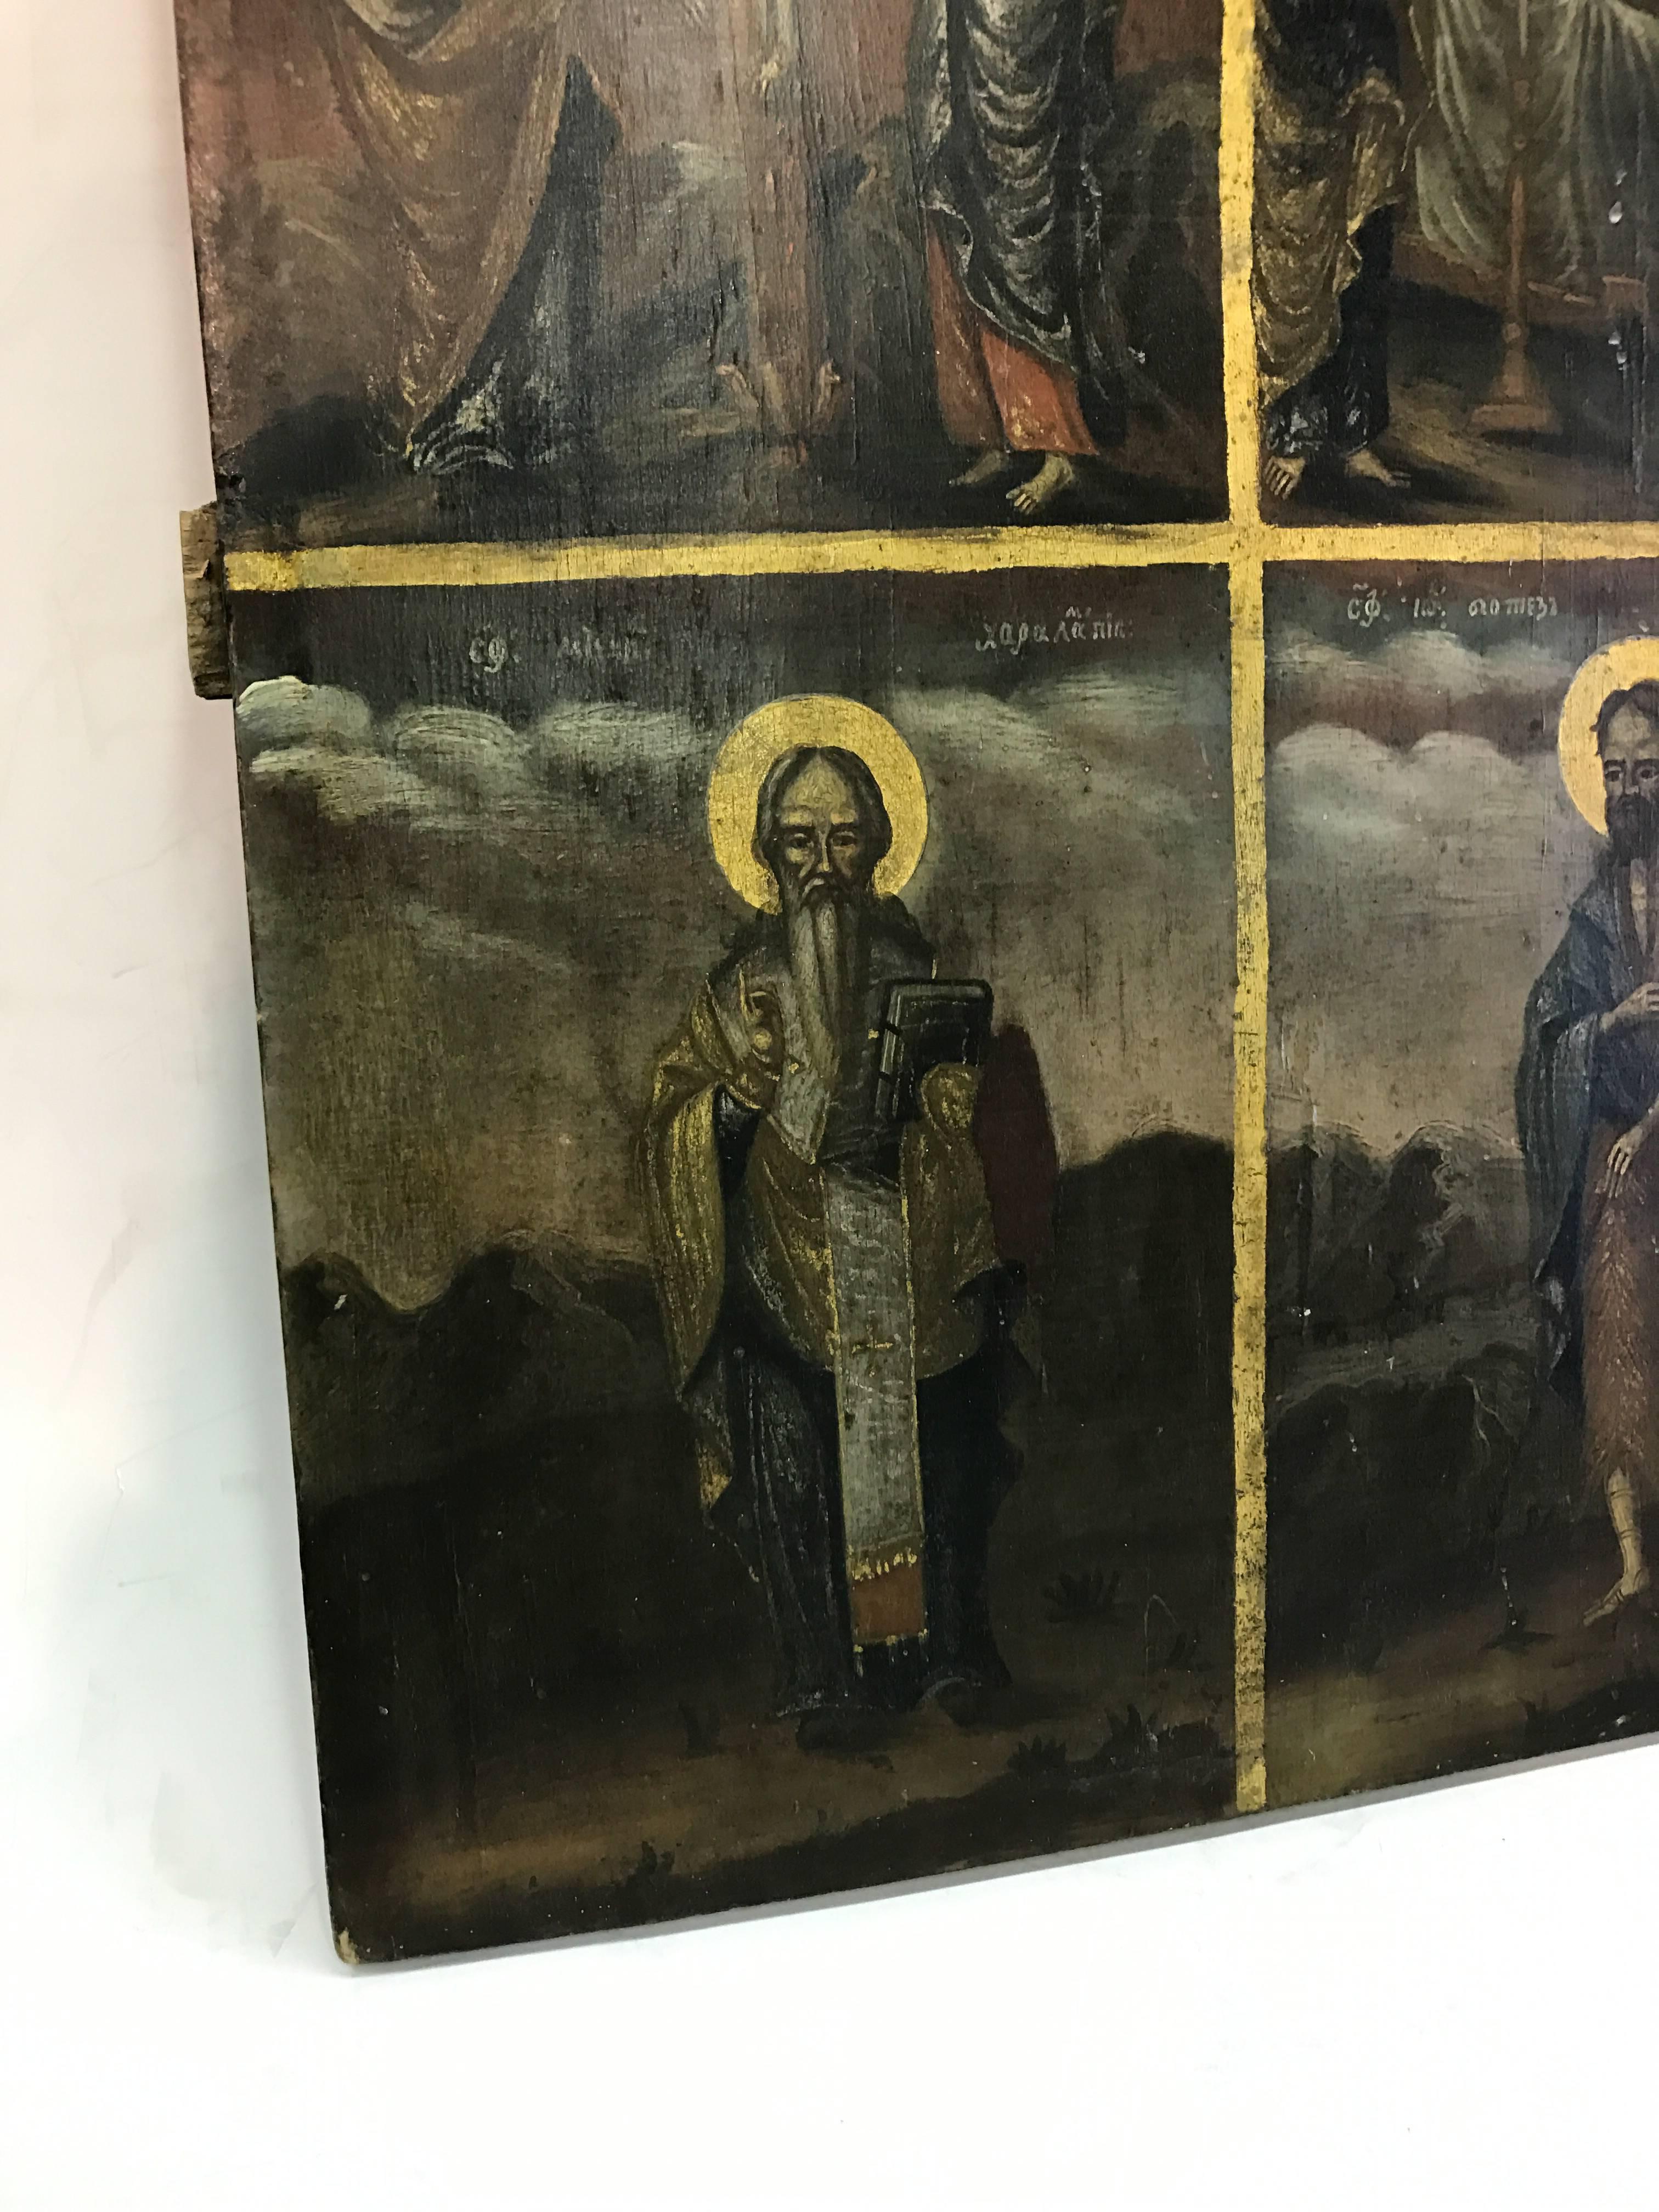 Russian painting on wood plank divided into four sections, each depicting a different religious scene.